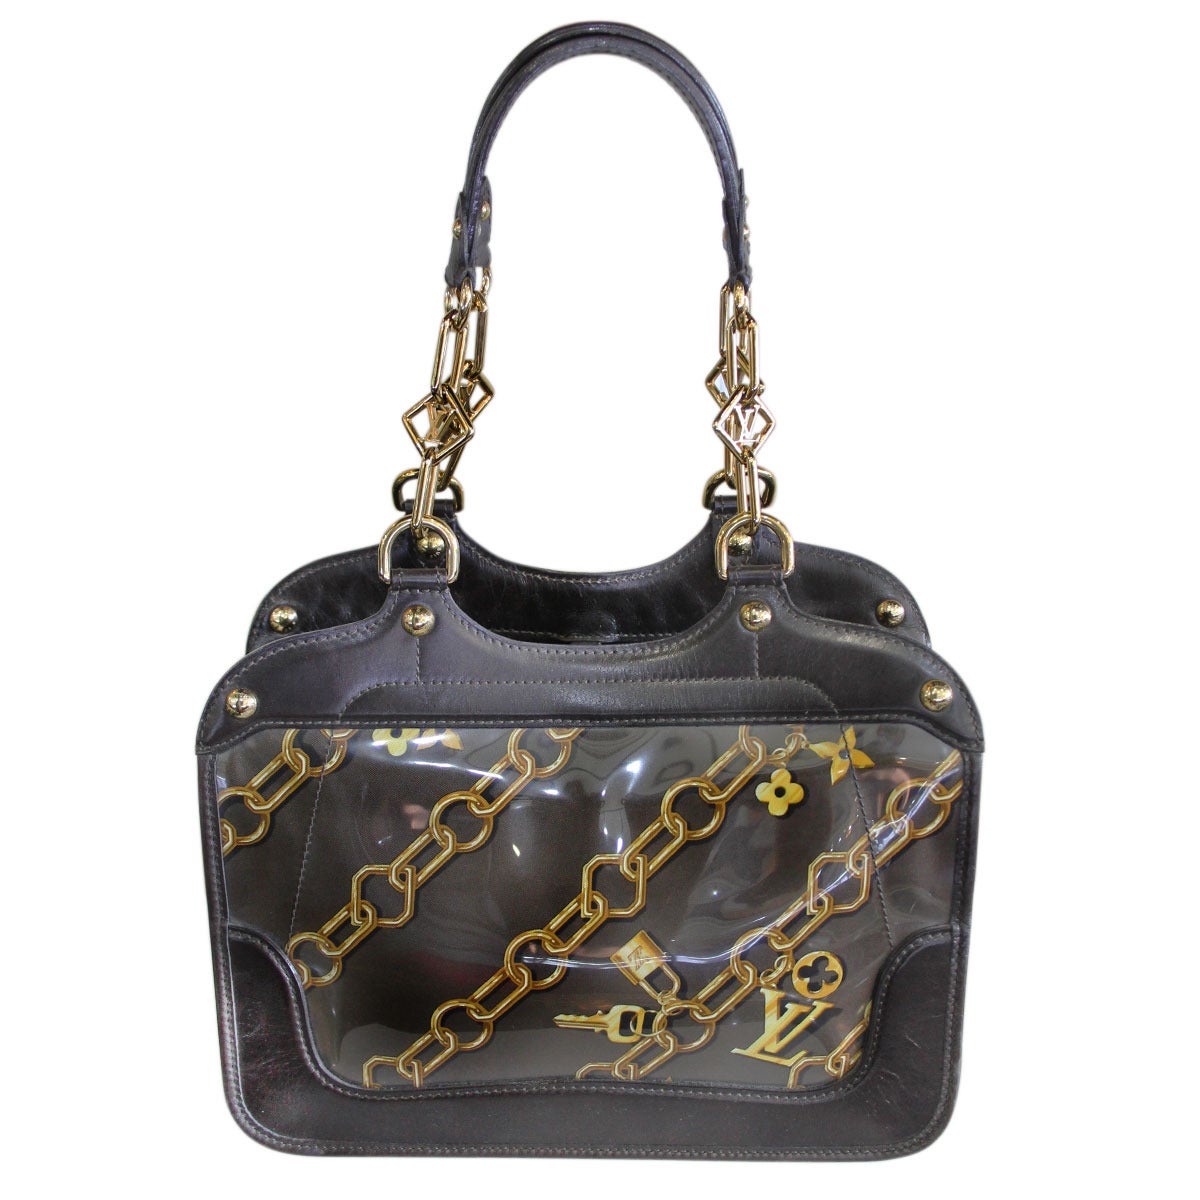 Brand: Louis Vuitton
Handles: Golden Brass LV Chain with Dark Brown Veal Leather Shoulder Pads
Drop: 8.5